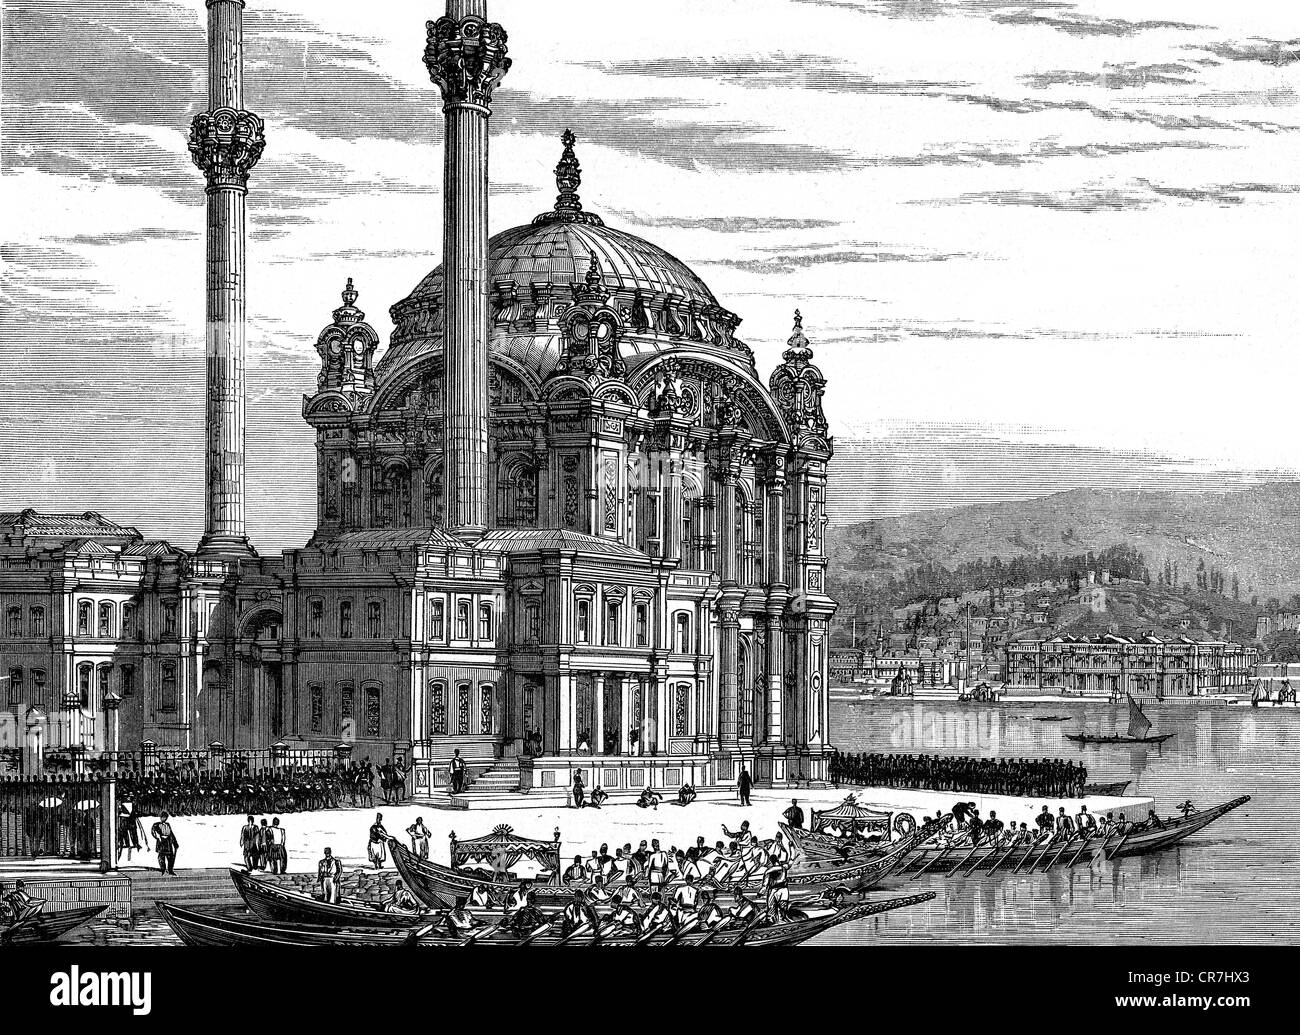 Abdul Hamid II, 21.9.1842 - 10.2.1918, Sultan of the Ottoman Empire 31.8.1876 - 27.4.1909, visting the Ortakoey Mosque for the Friday Prayer, wood engraving, 1887, Stock Photo